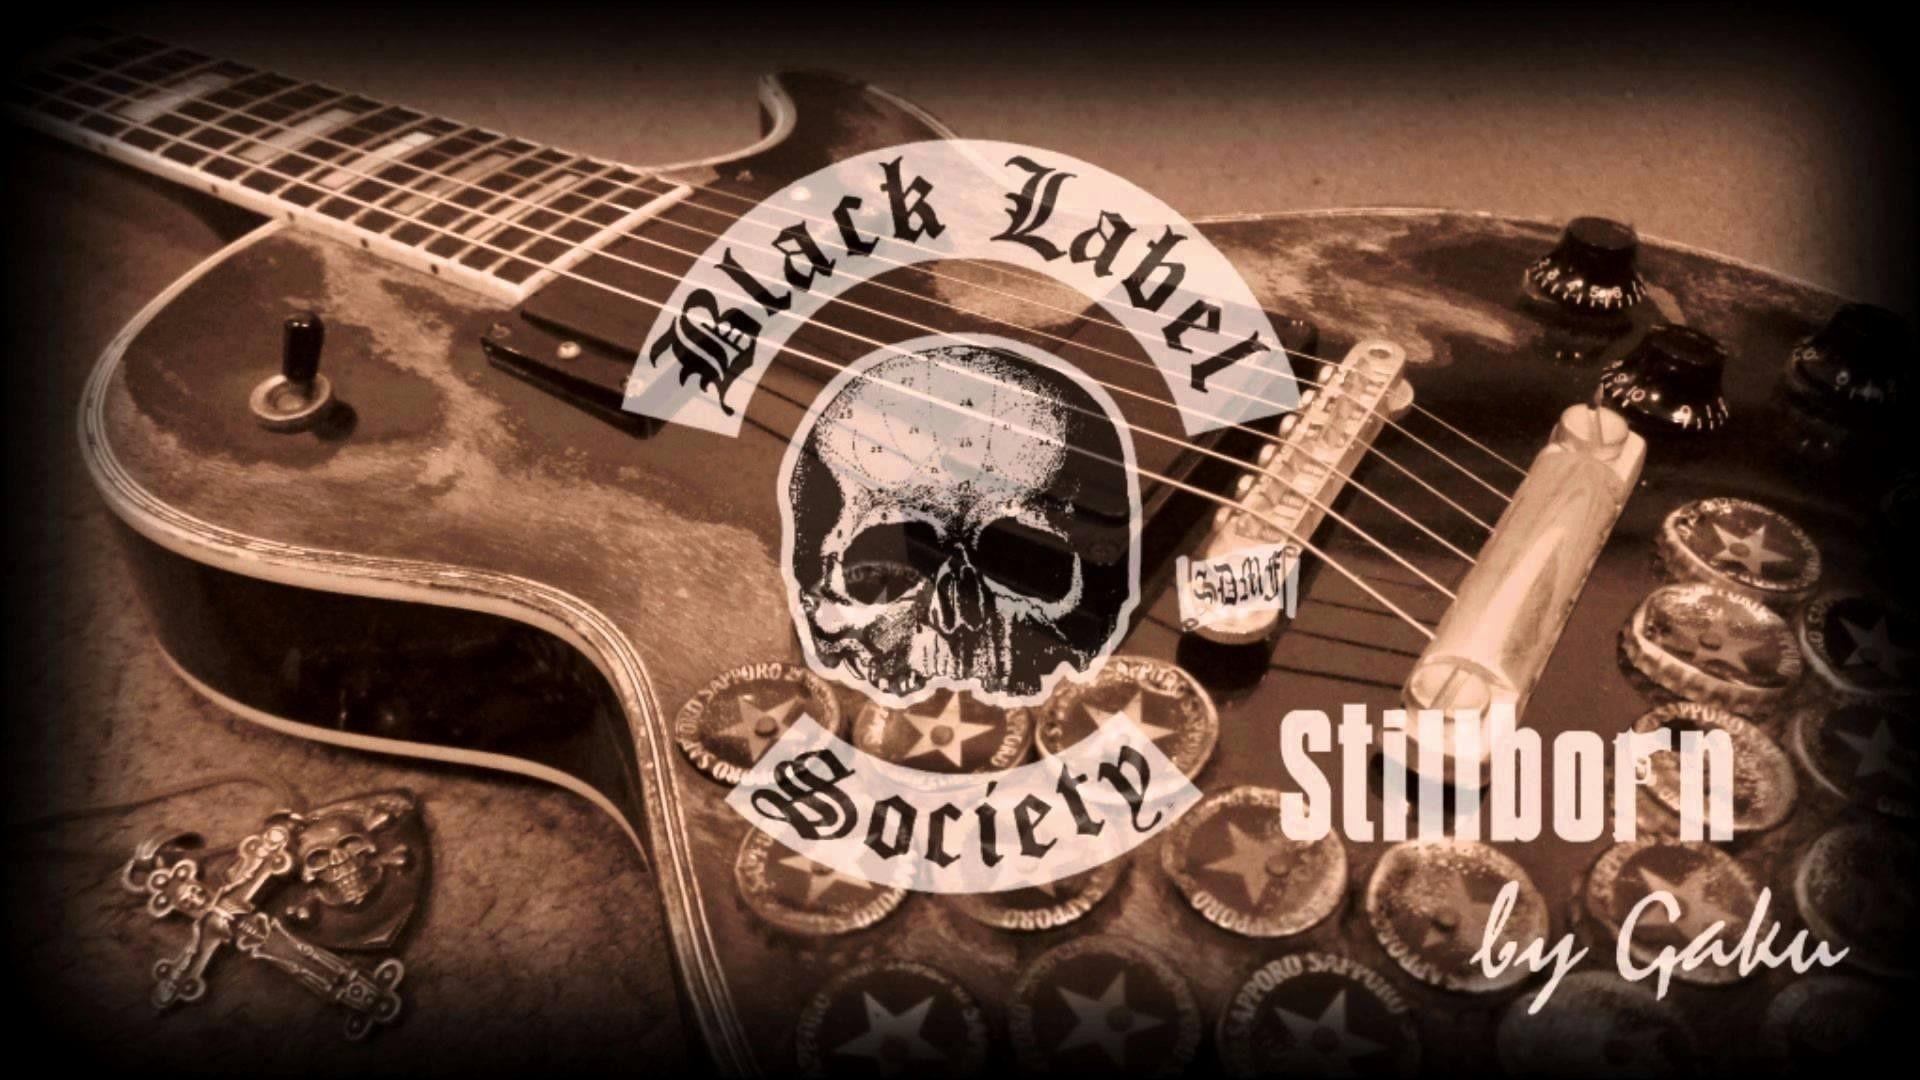 Black Label Society Wallpapers - Top Free Black Label Society